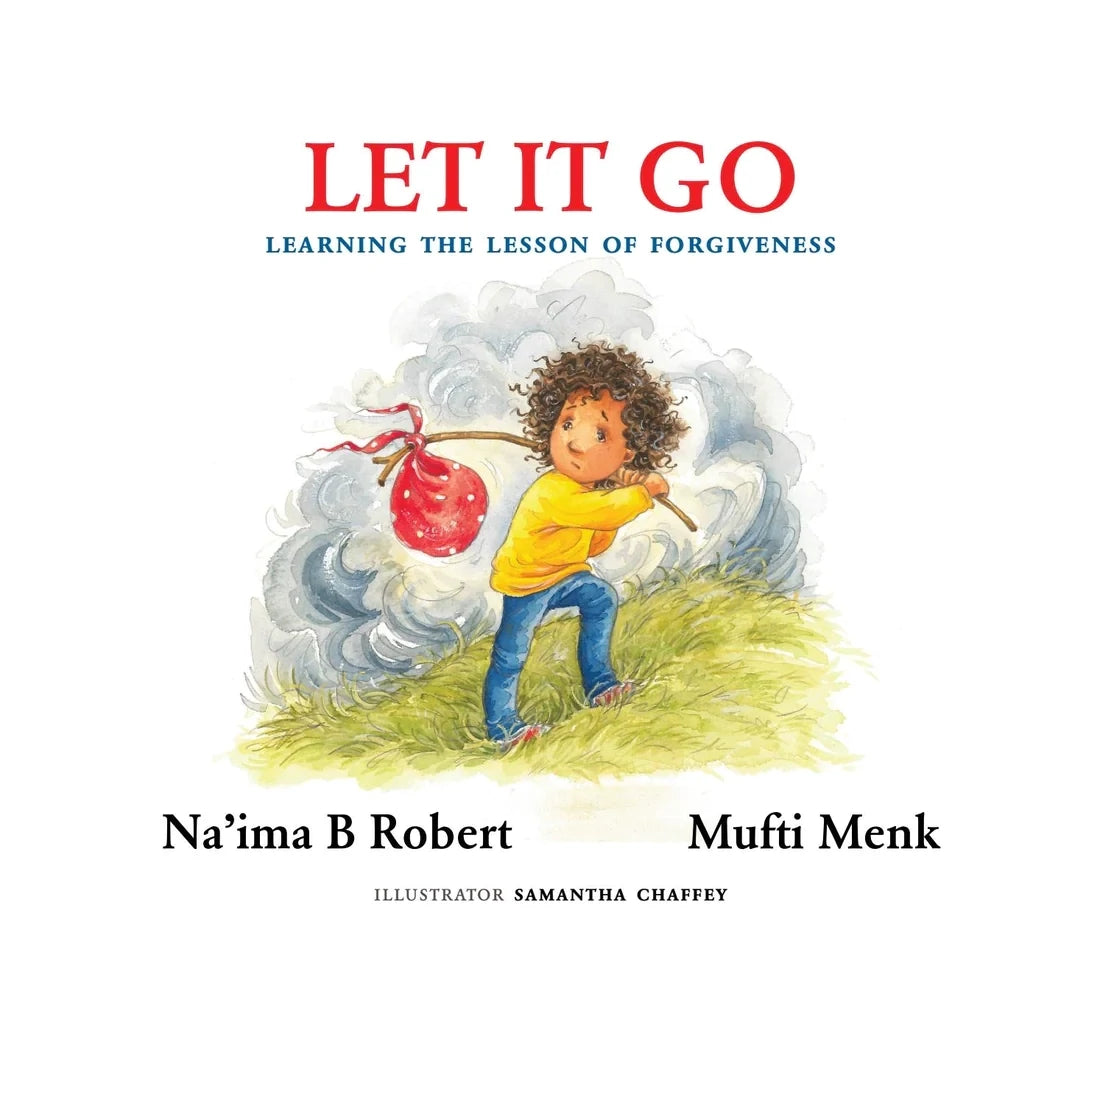 Let it go - Na'ima B and Mufti Menk